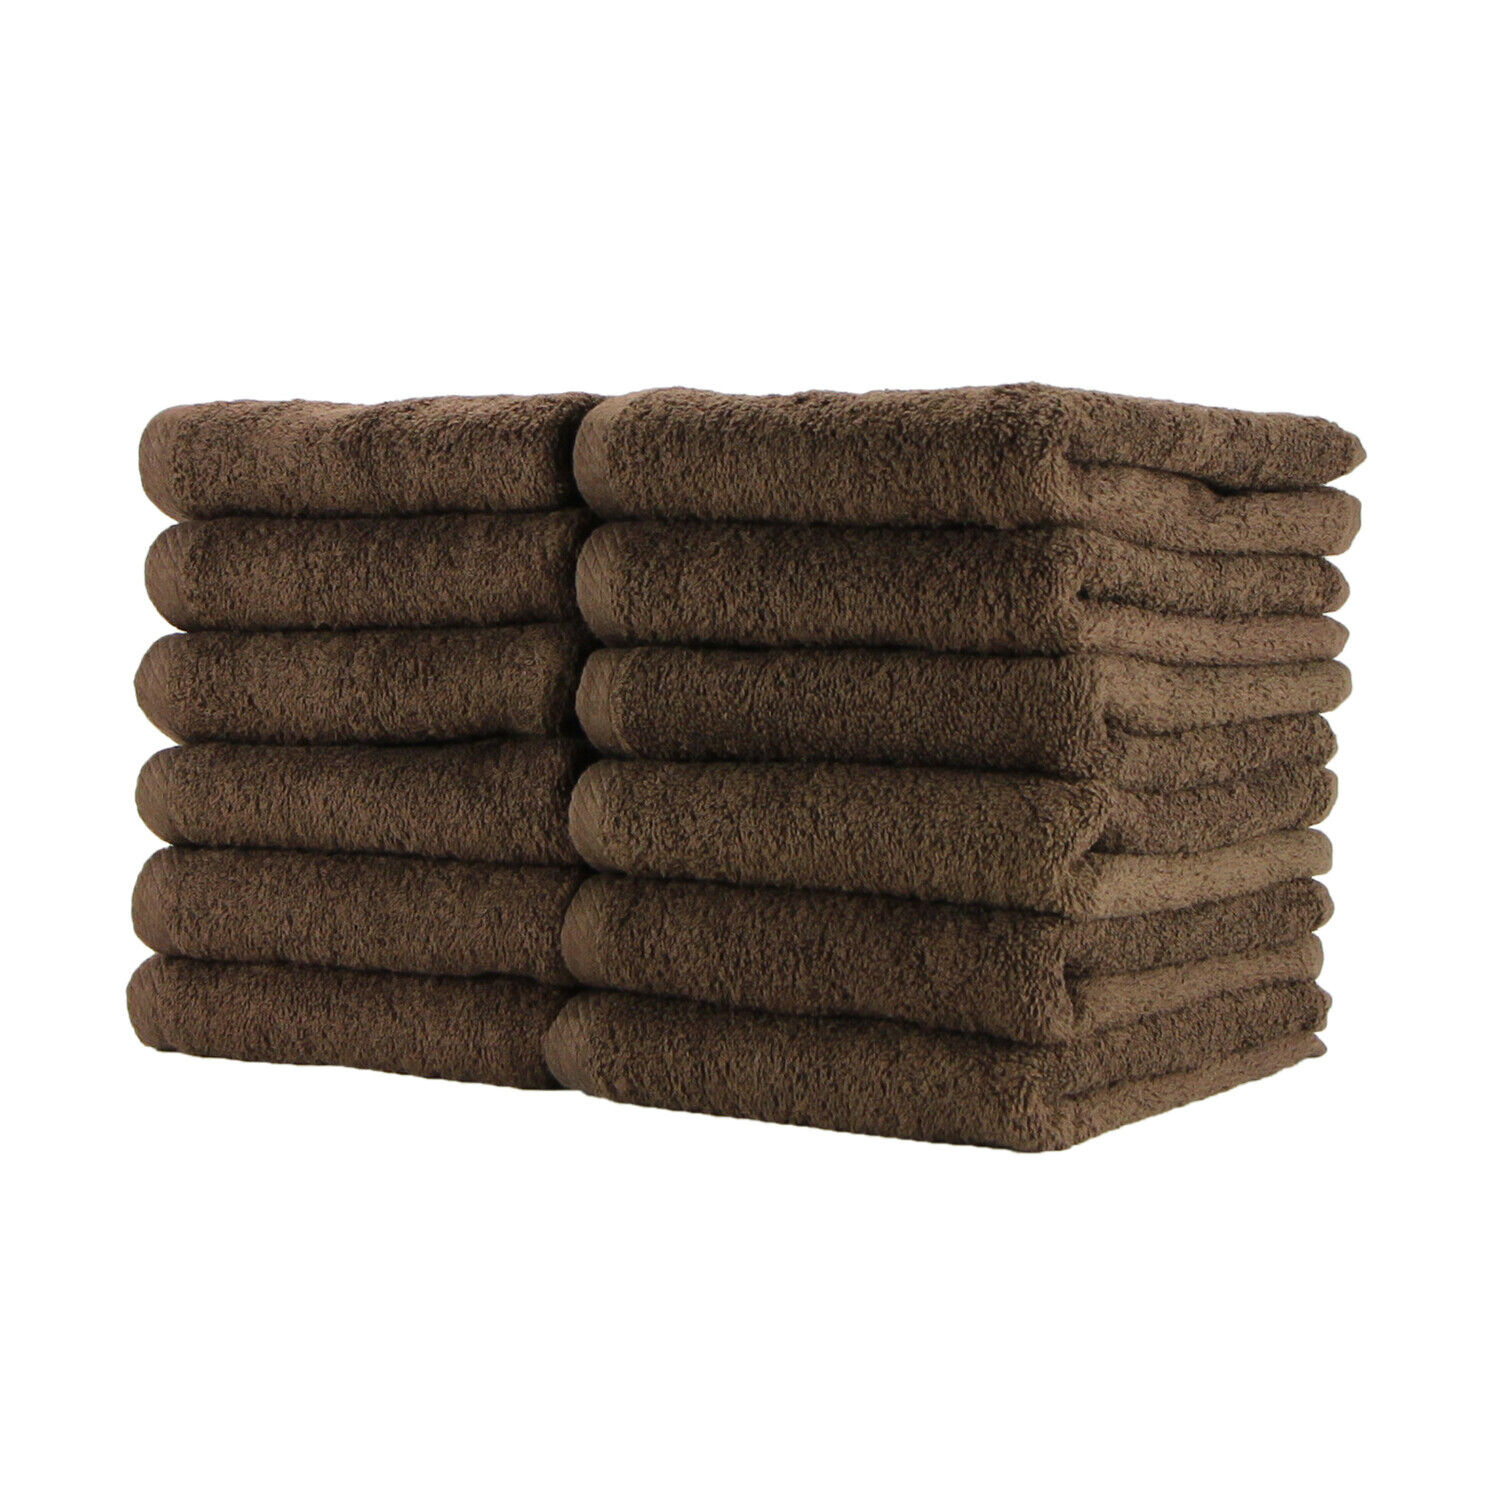 Salon Towels - Packs of 12 - Bleach Safe 16 x 27 Cotton Towel - Color Options  Arkwright Does Not Apply - фотография #10